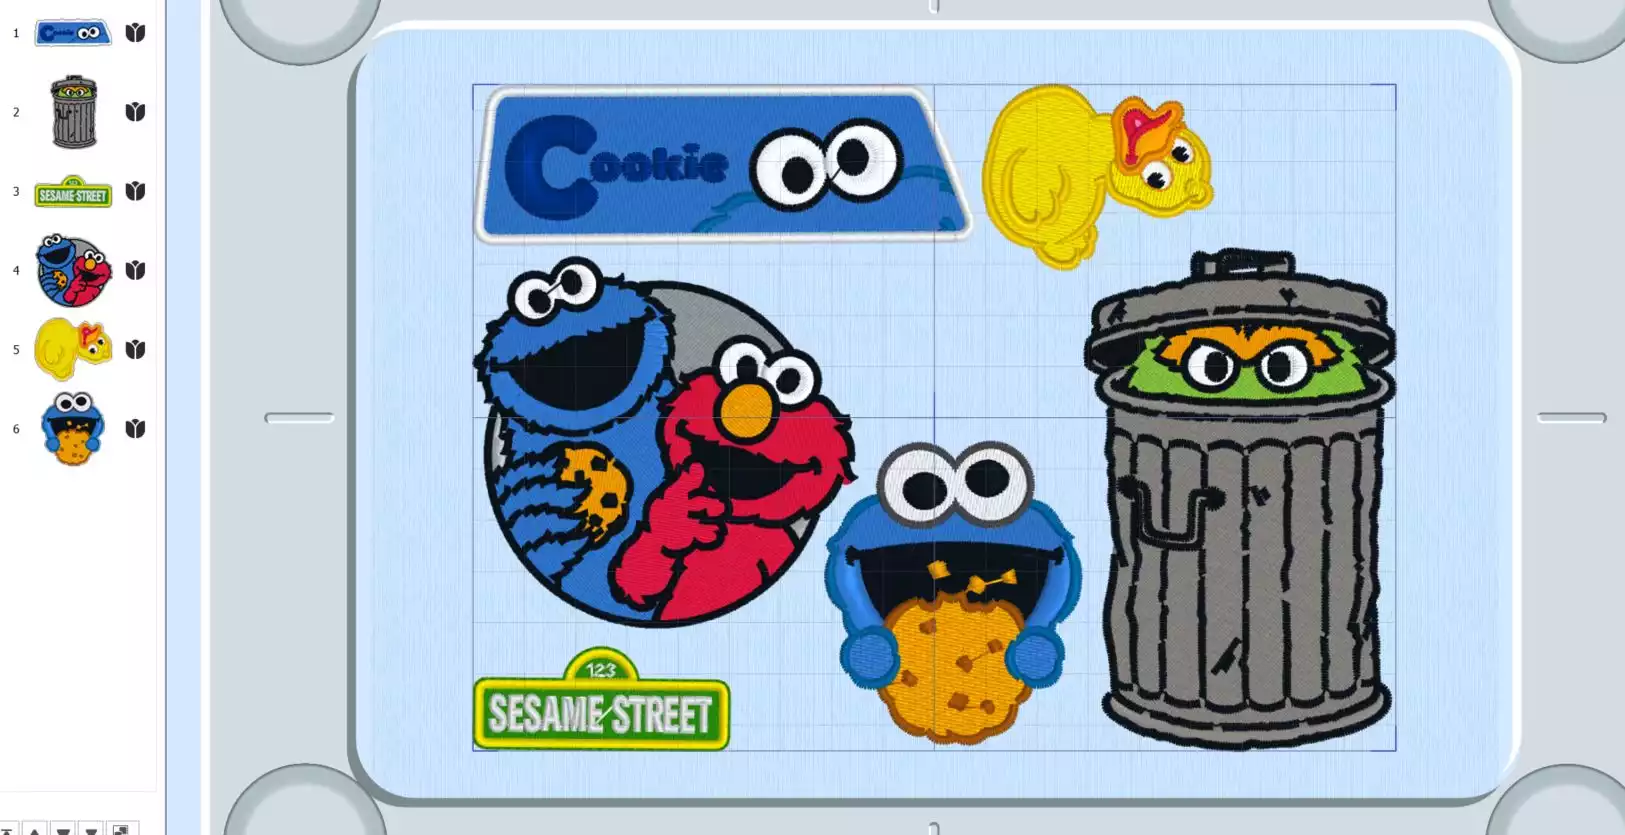 Sesame-street-patches-embroideries-added-to-hoop.jpg